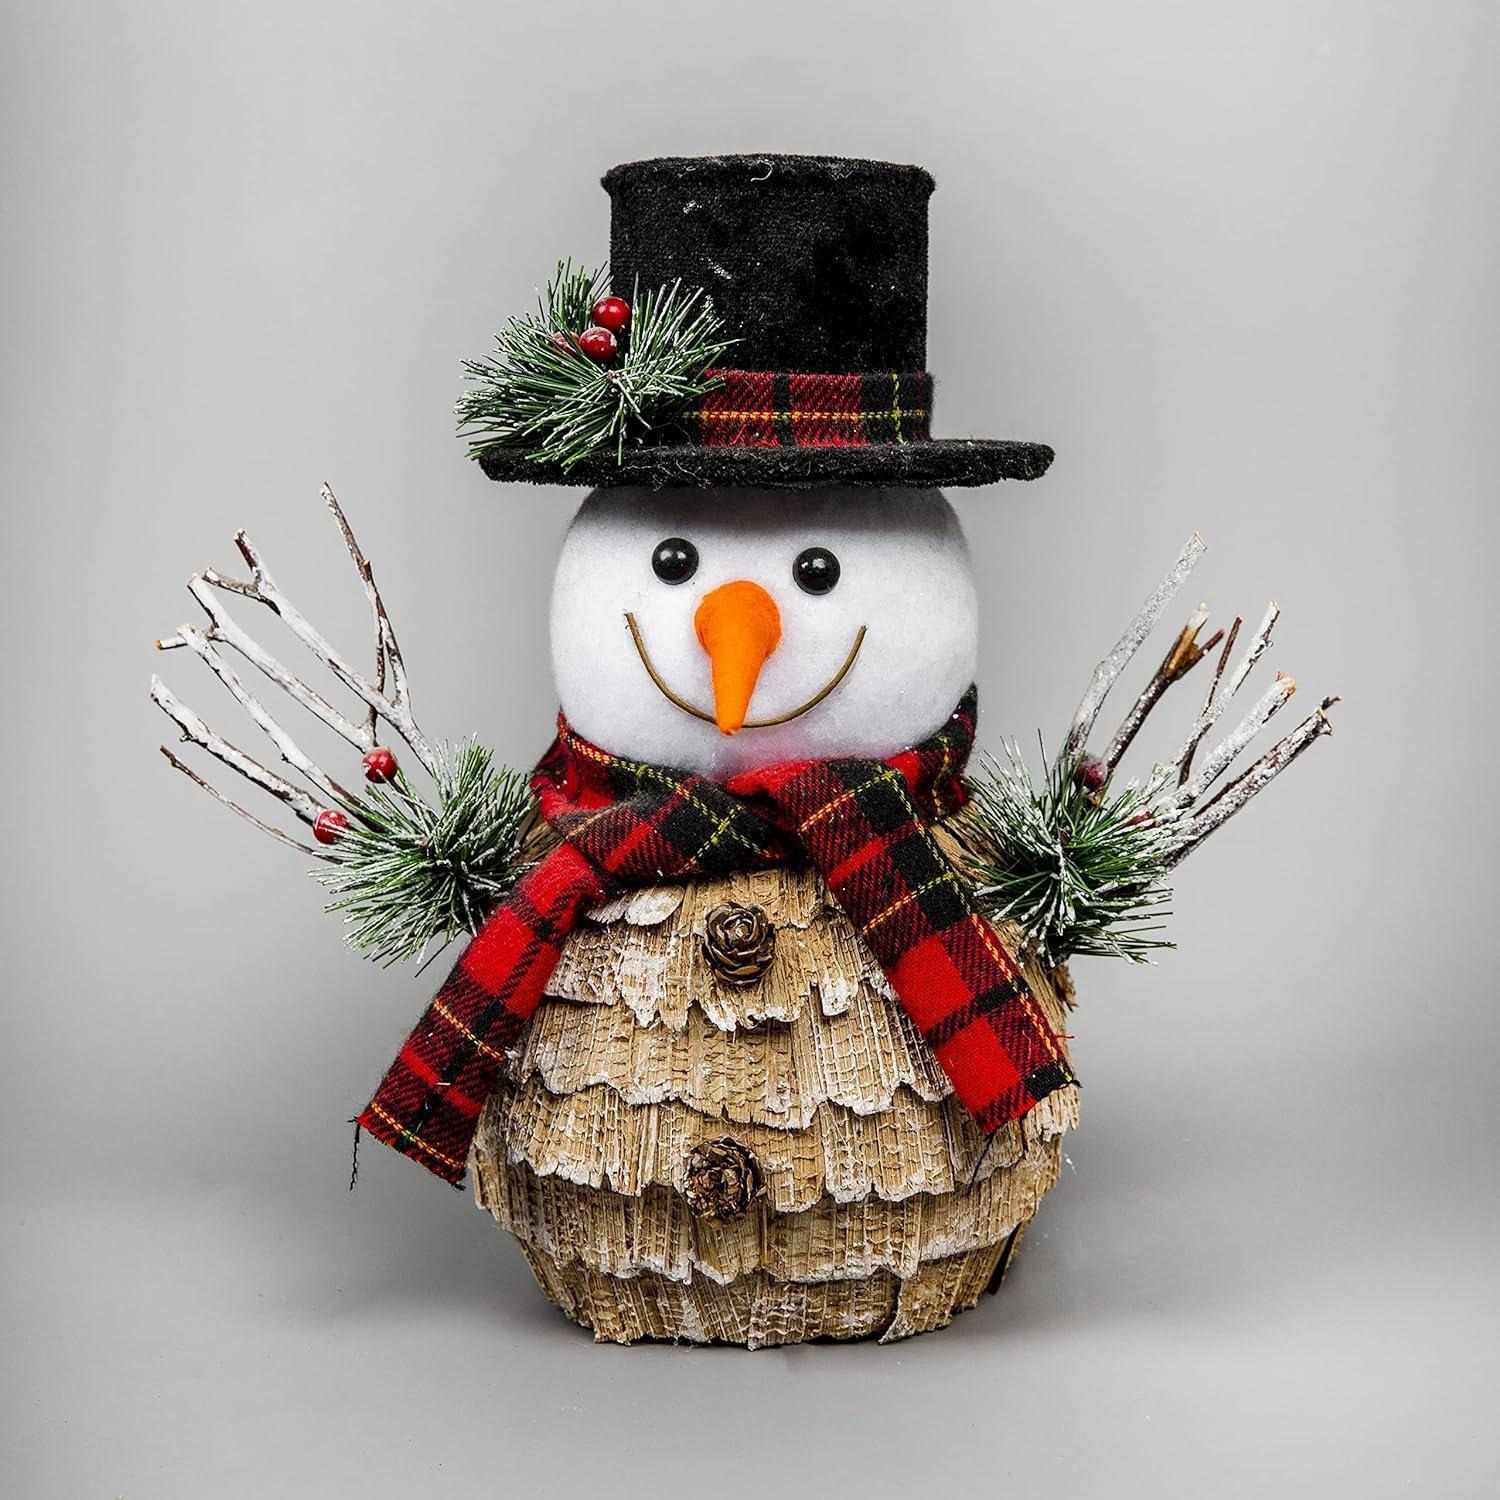 34cm Christmas Tabletop Decorated with Pines Berries White penguin Standing Snowman - image 1